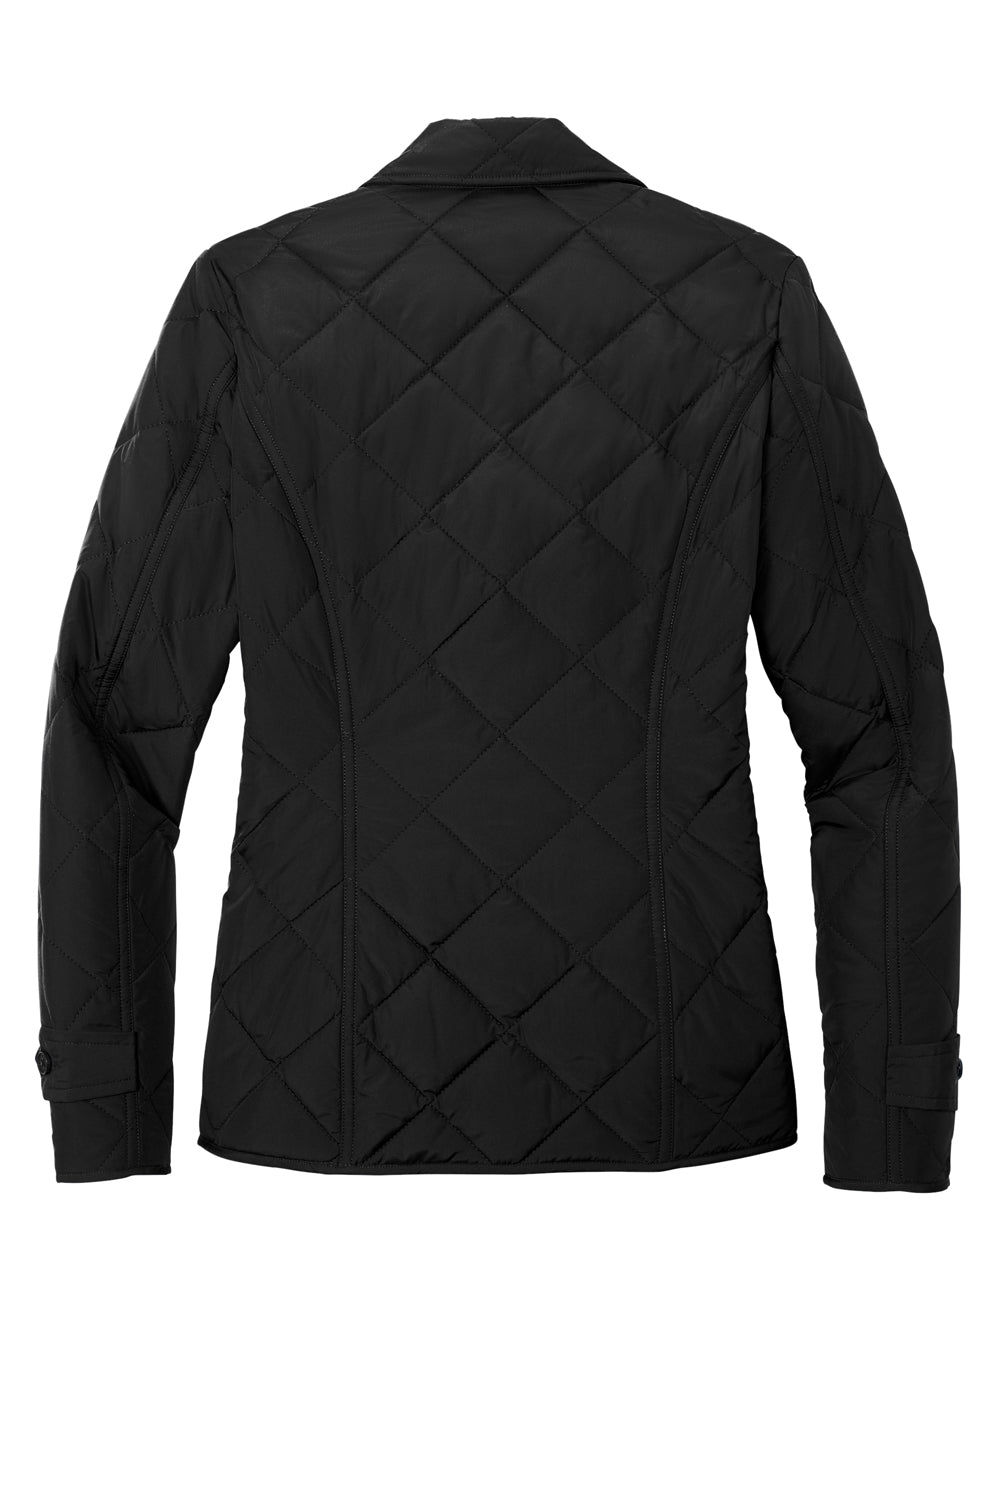 Brooks Brothers Womens Water Resistant Quilted Full Zip Jacket Deep Black Flat Back